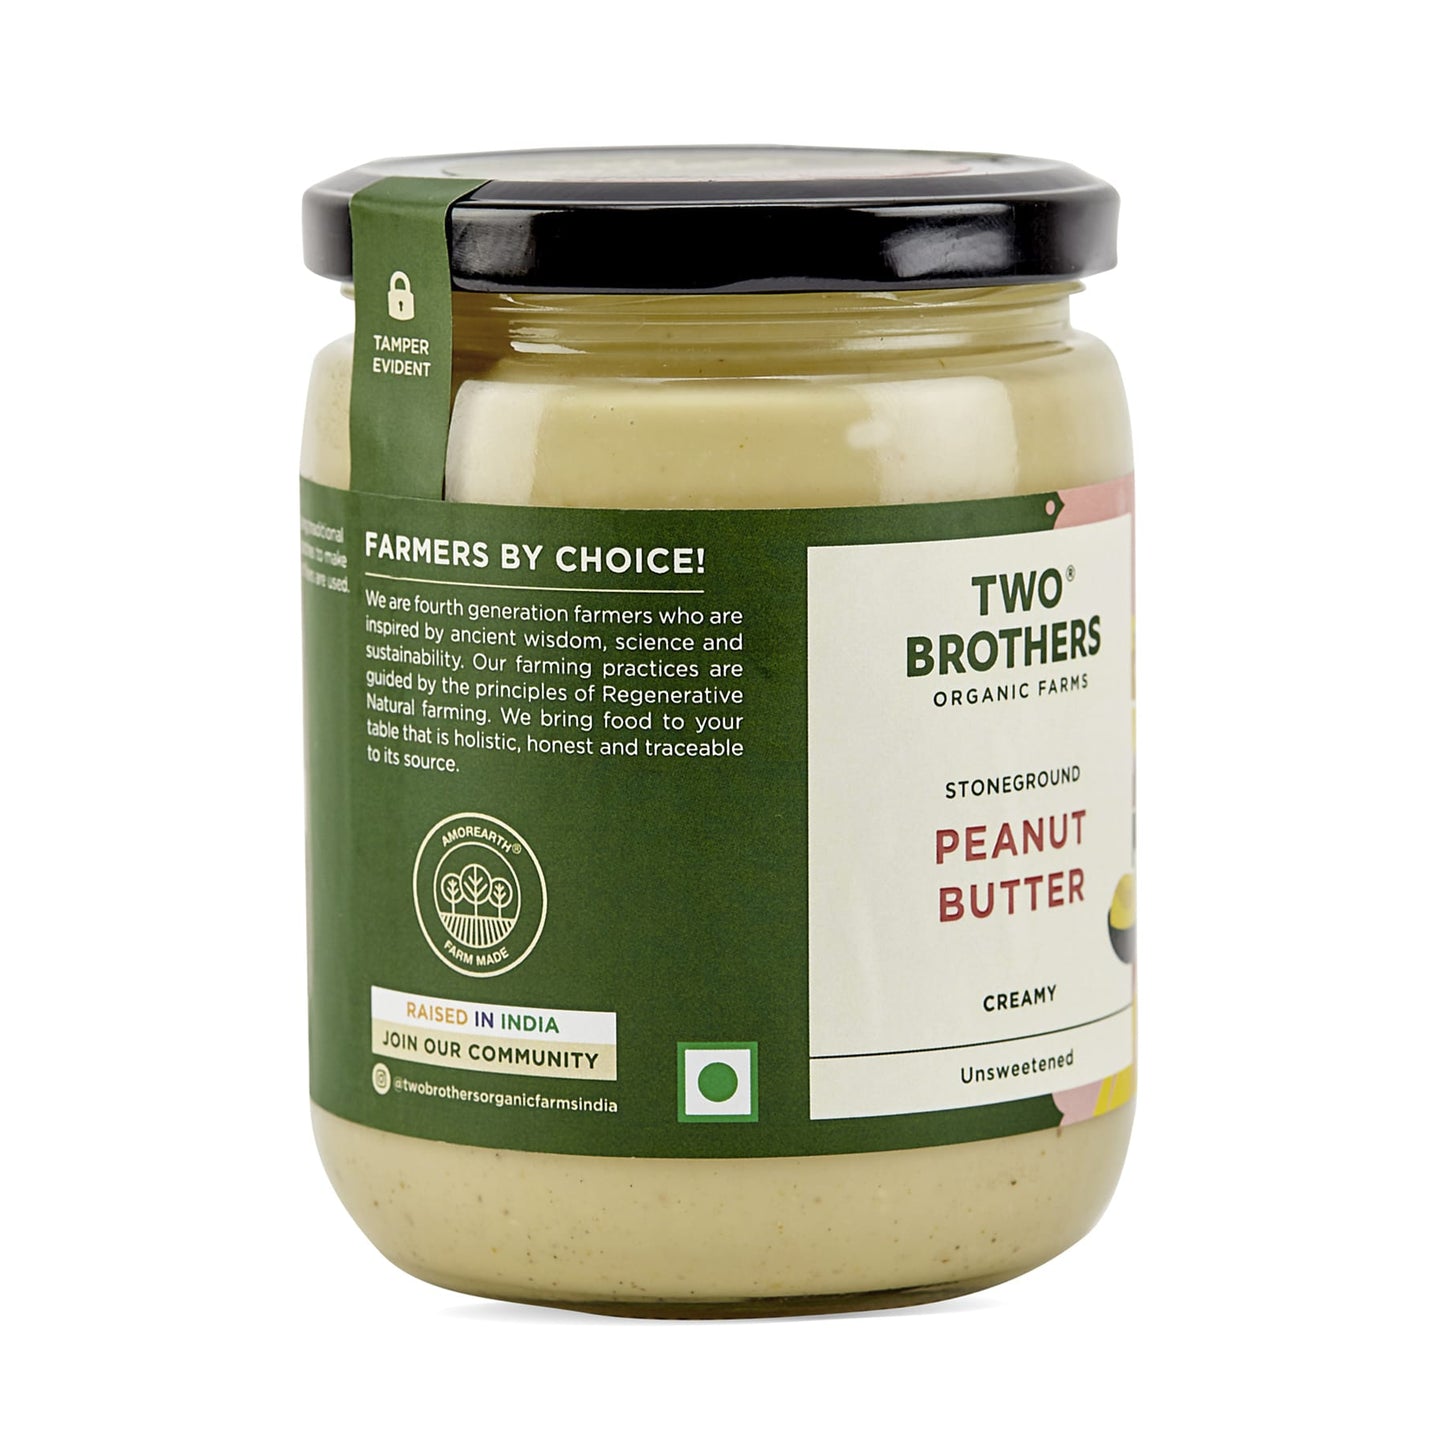 Buy Two Brothers AMOREARTH Plain Peanut Butter unsweetened online